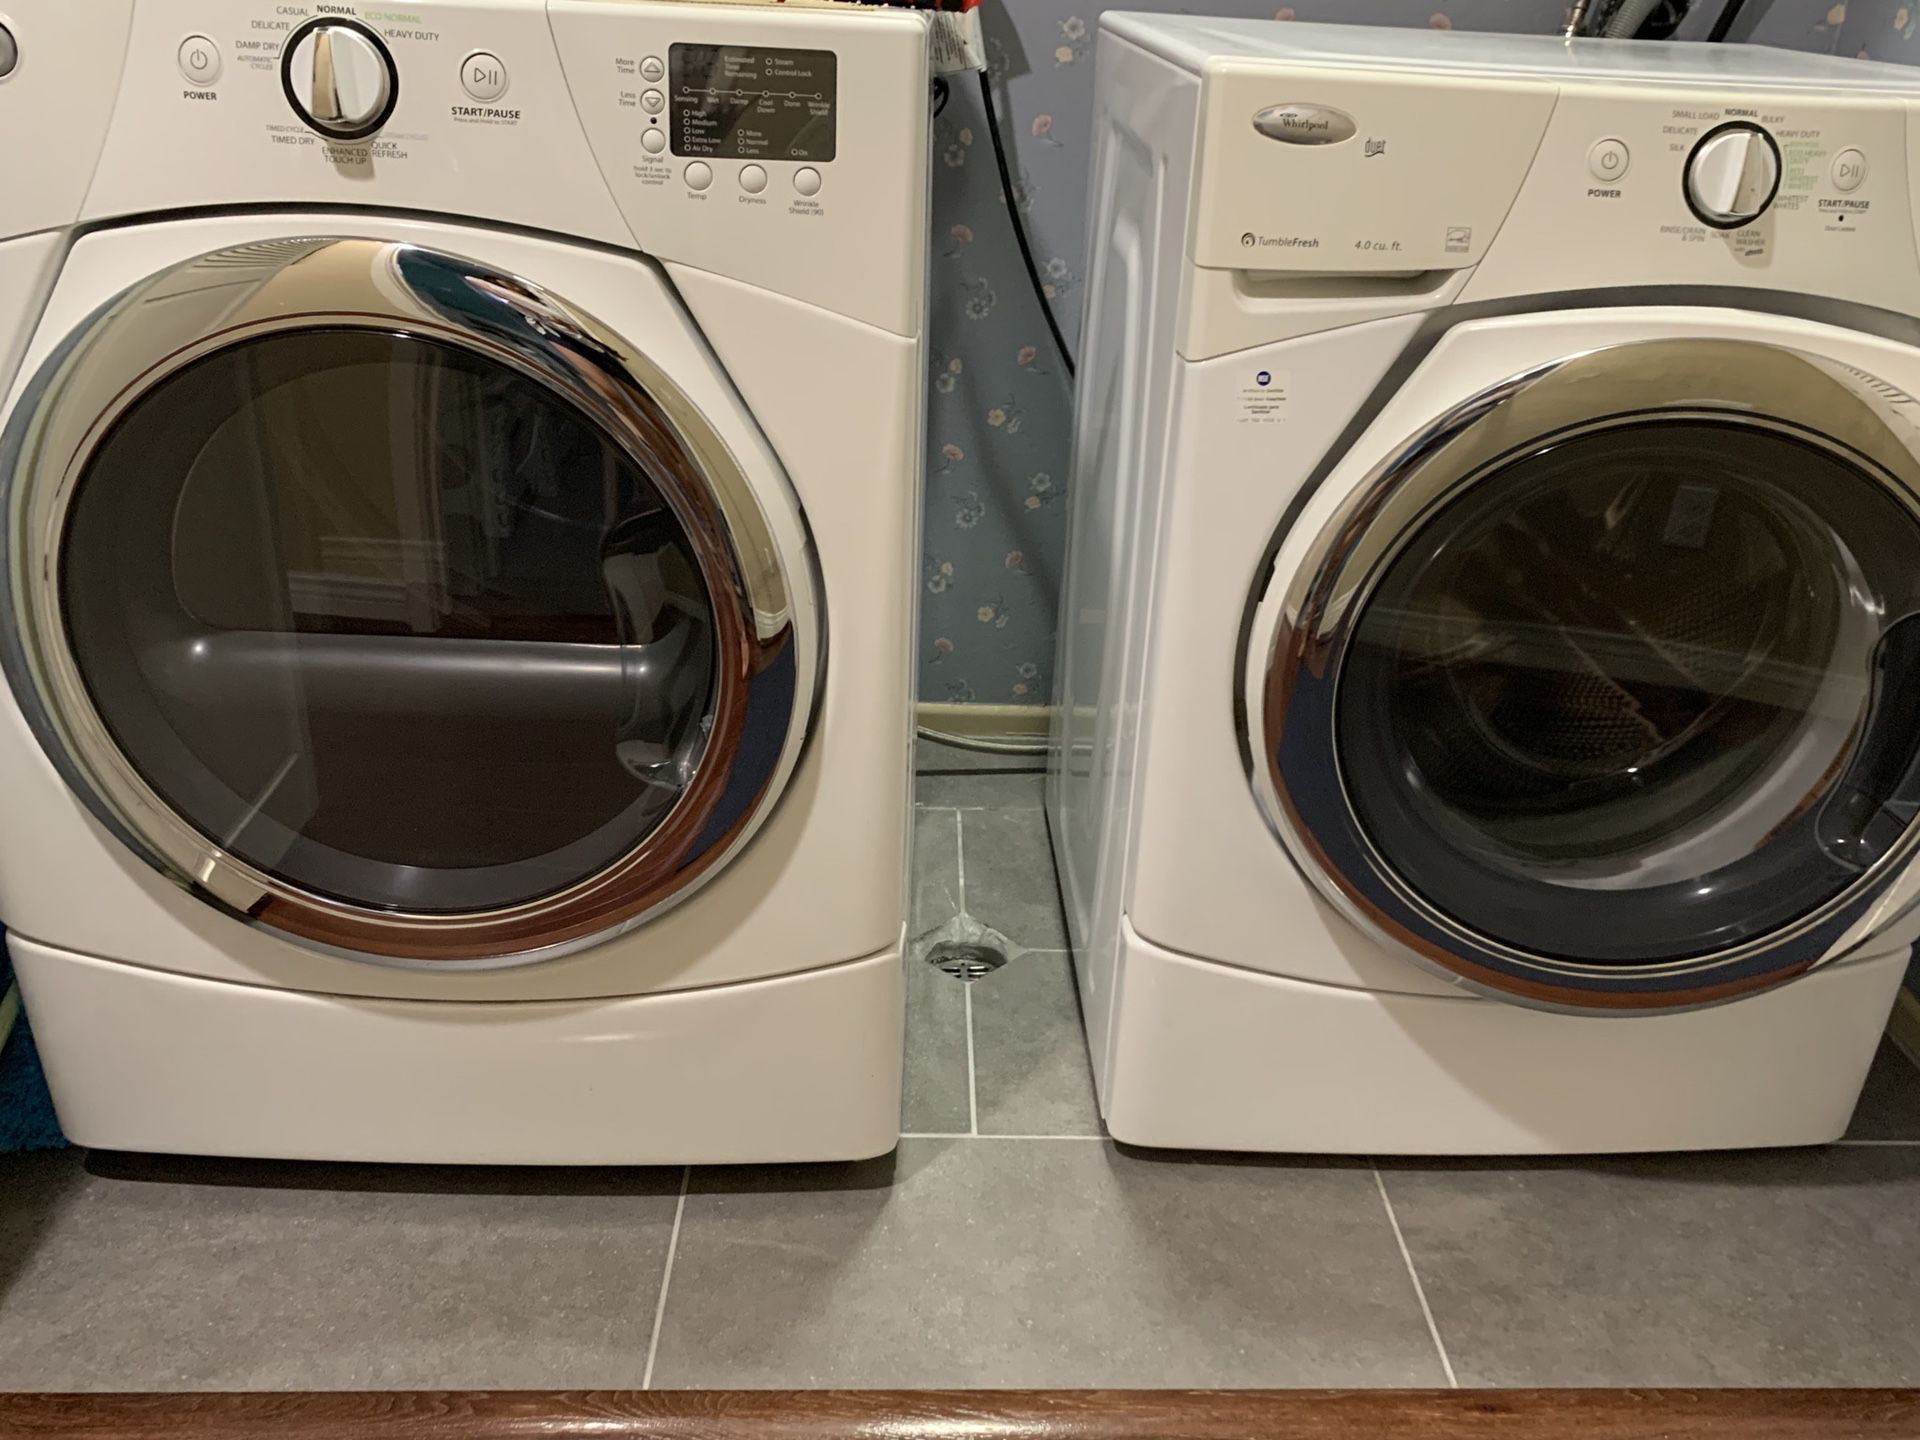 Whirlpool front load duet washer and gas dryer set